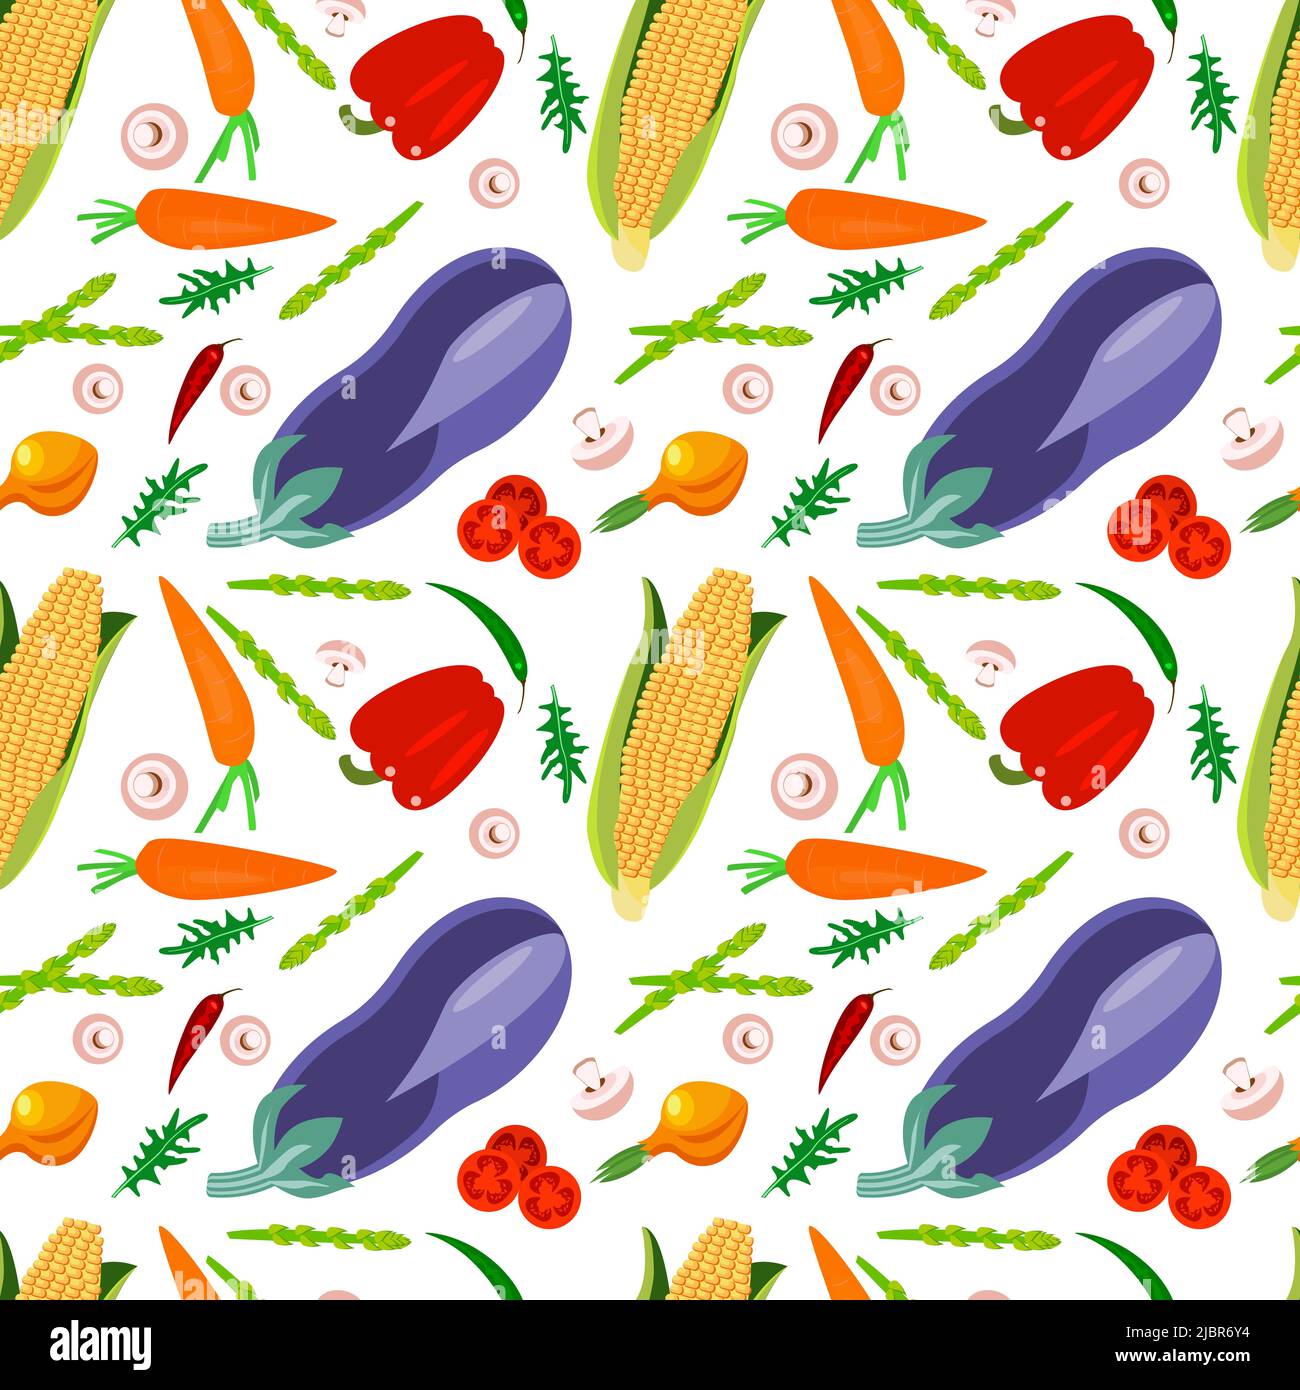 Food background and colorful vegetables seamless pattern Stock Photo